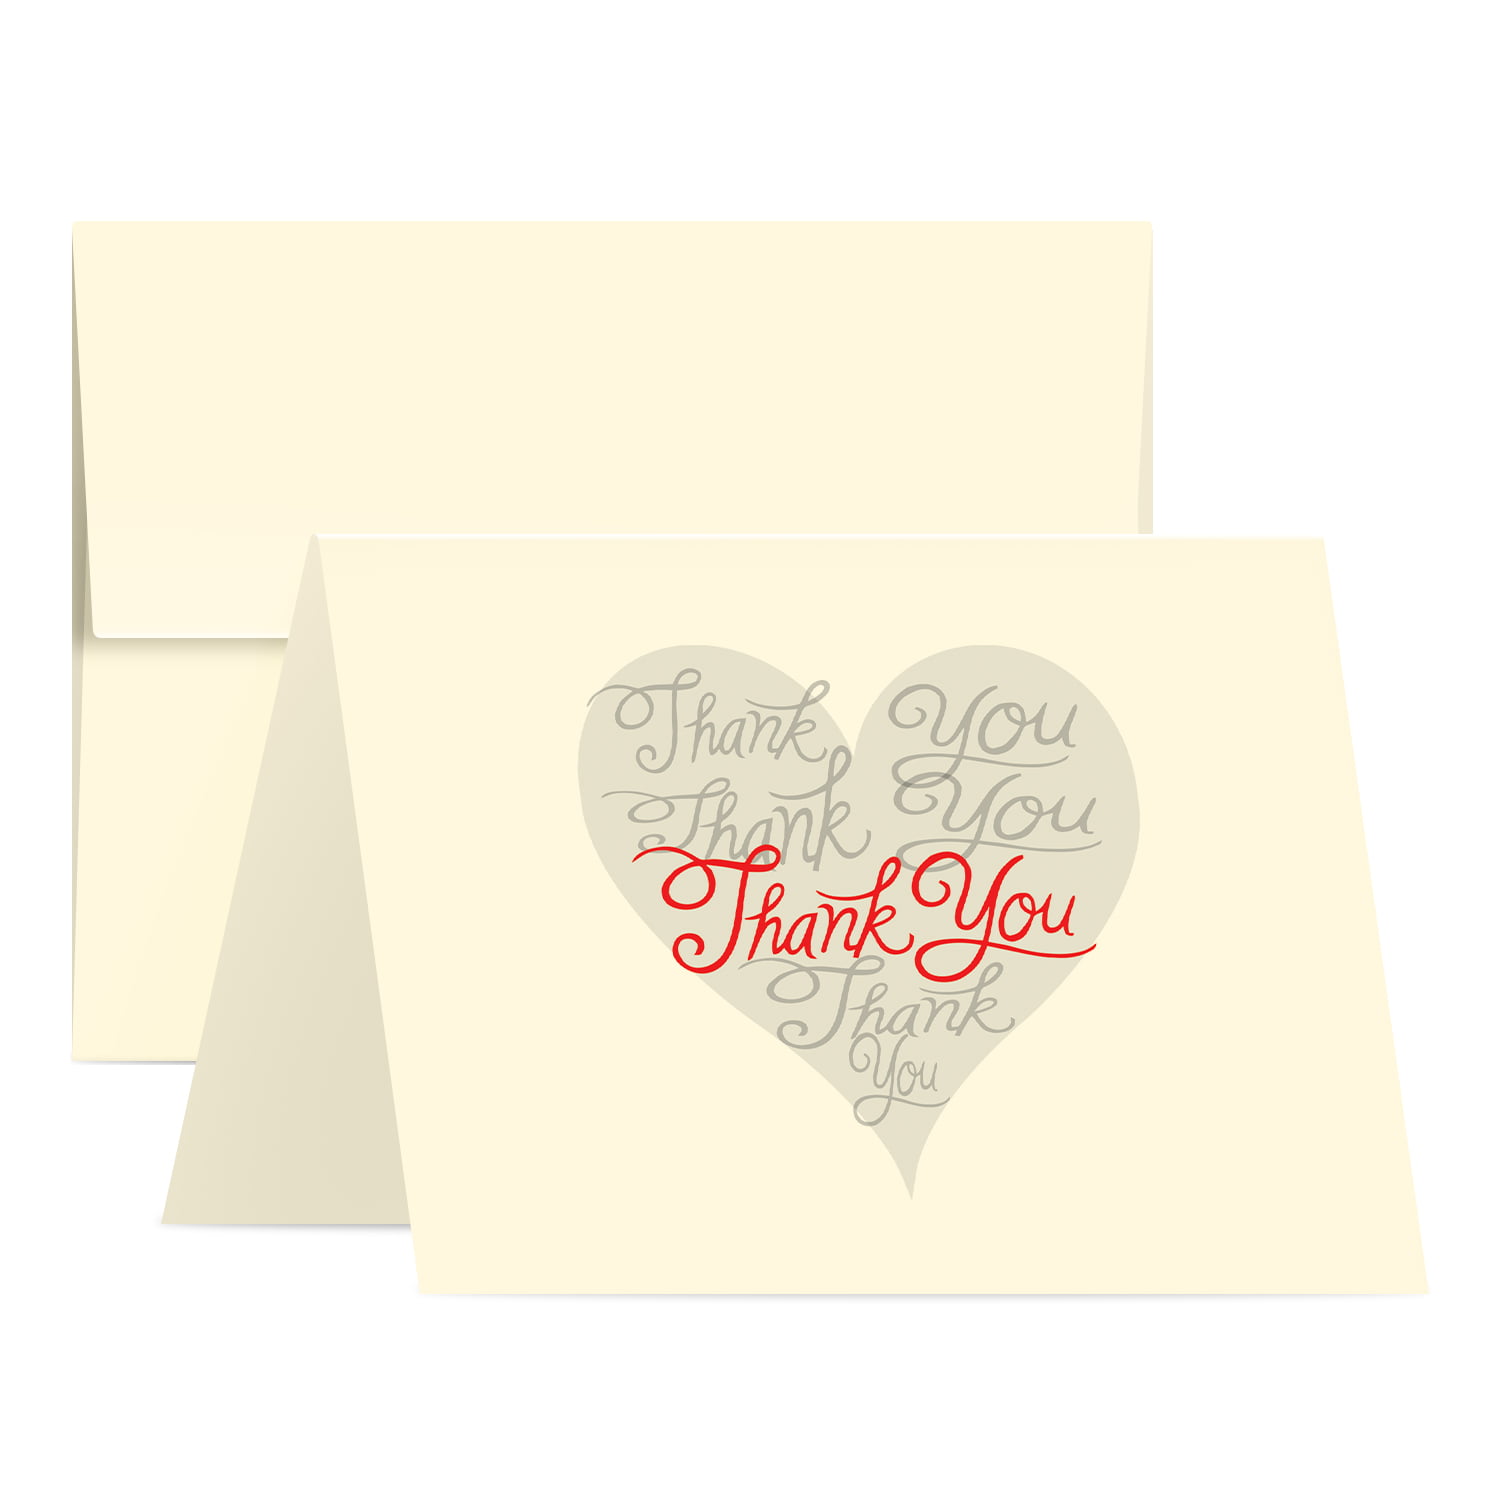 Folded Greeting Card with Envelope Blank Inside Funny Pun Anniversary Card for Boyfriend I Love You Card Wife Funny Sweet Valentines Day Card Husband Girlfriend